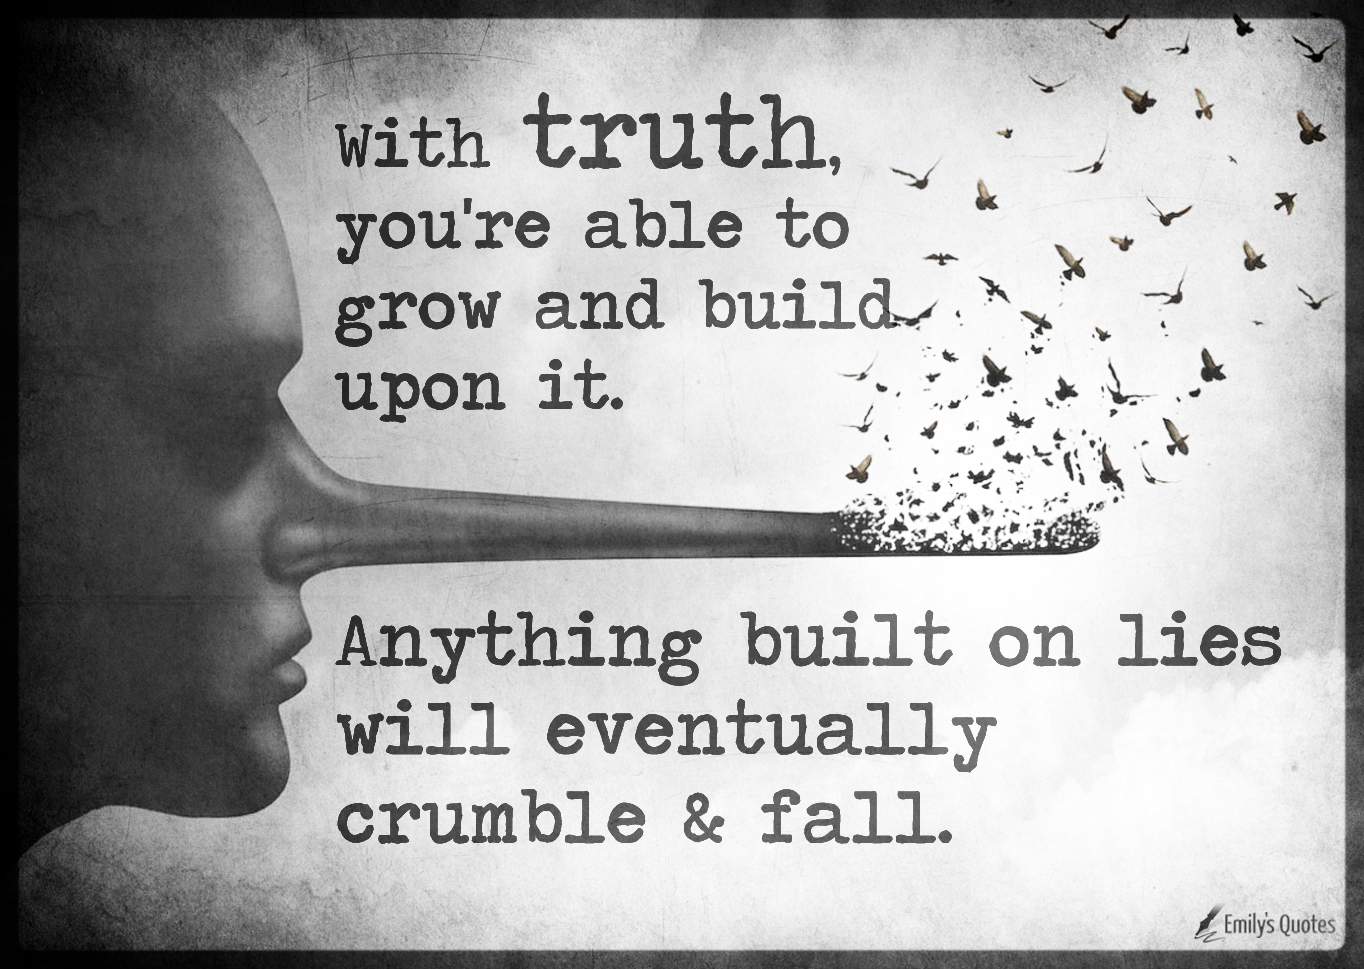 With truth, you’re able to grow and build upon it. Anything built